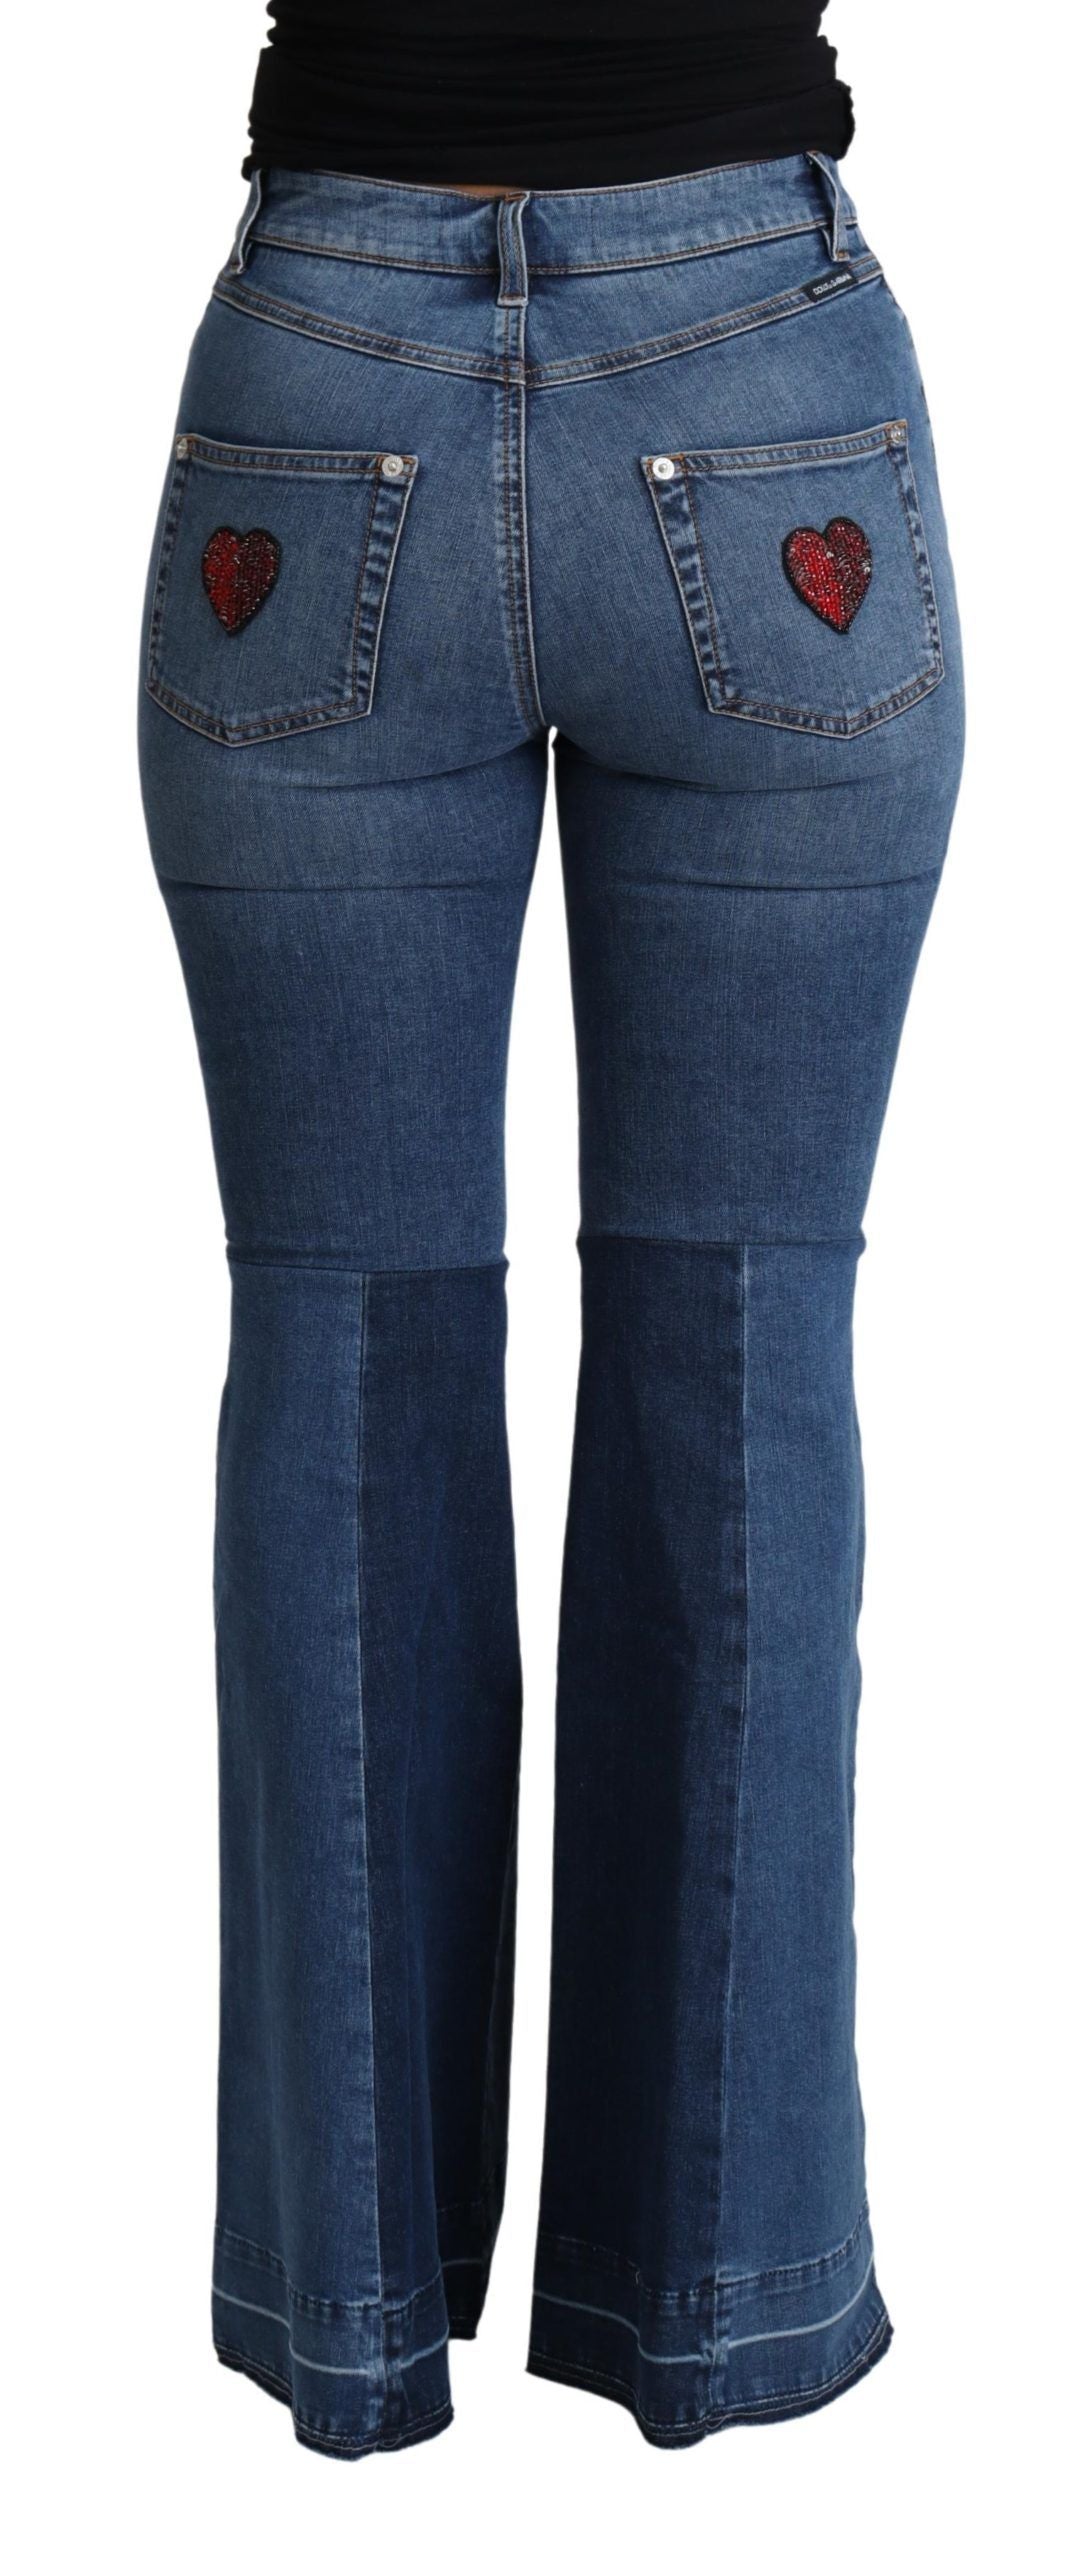 Elegant Boot Cut Denim Jeans with Amore Patch